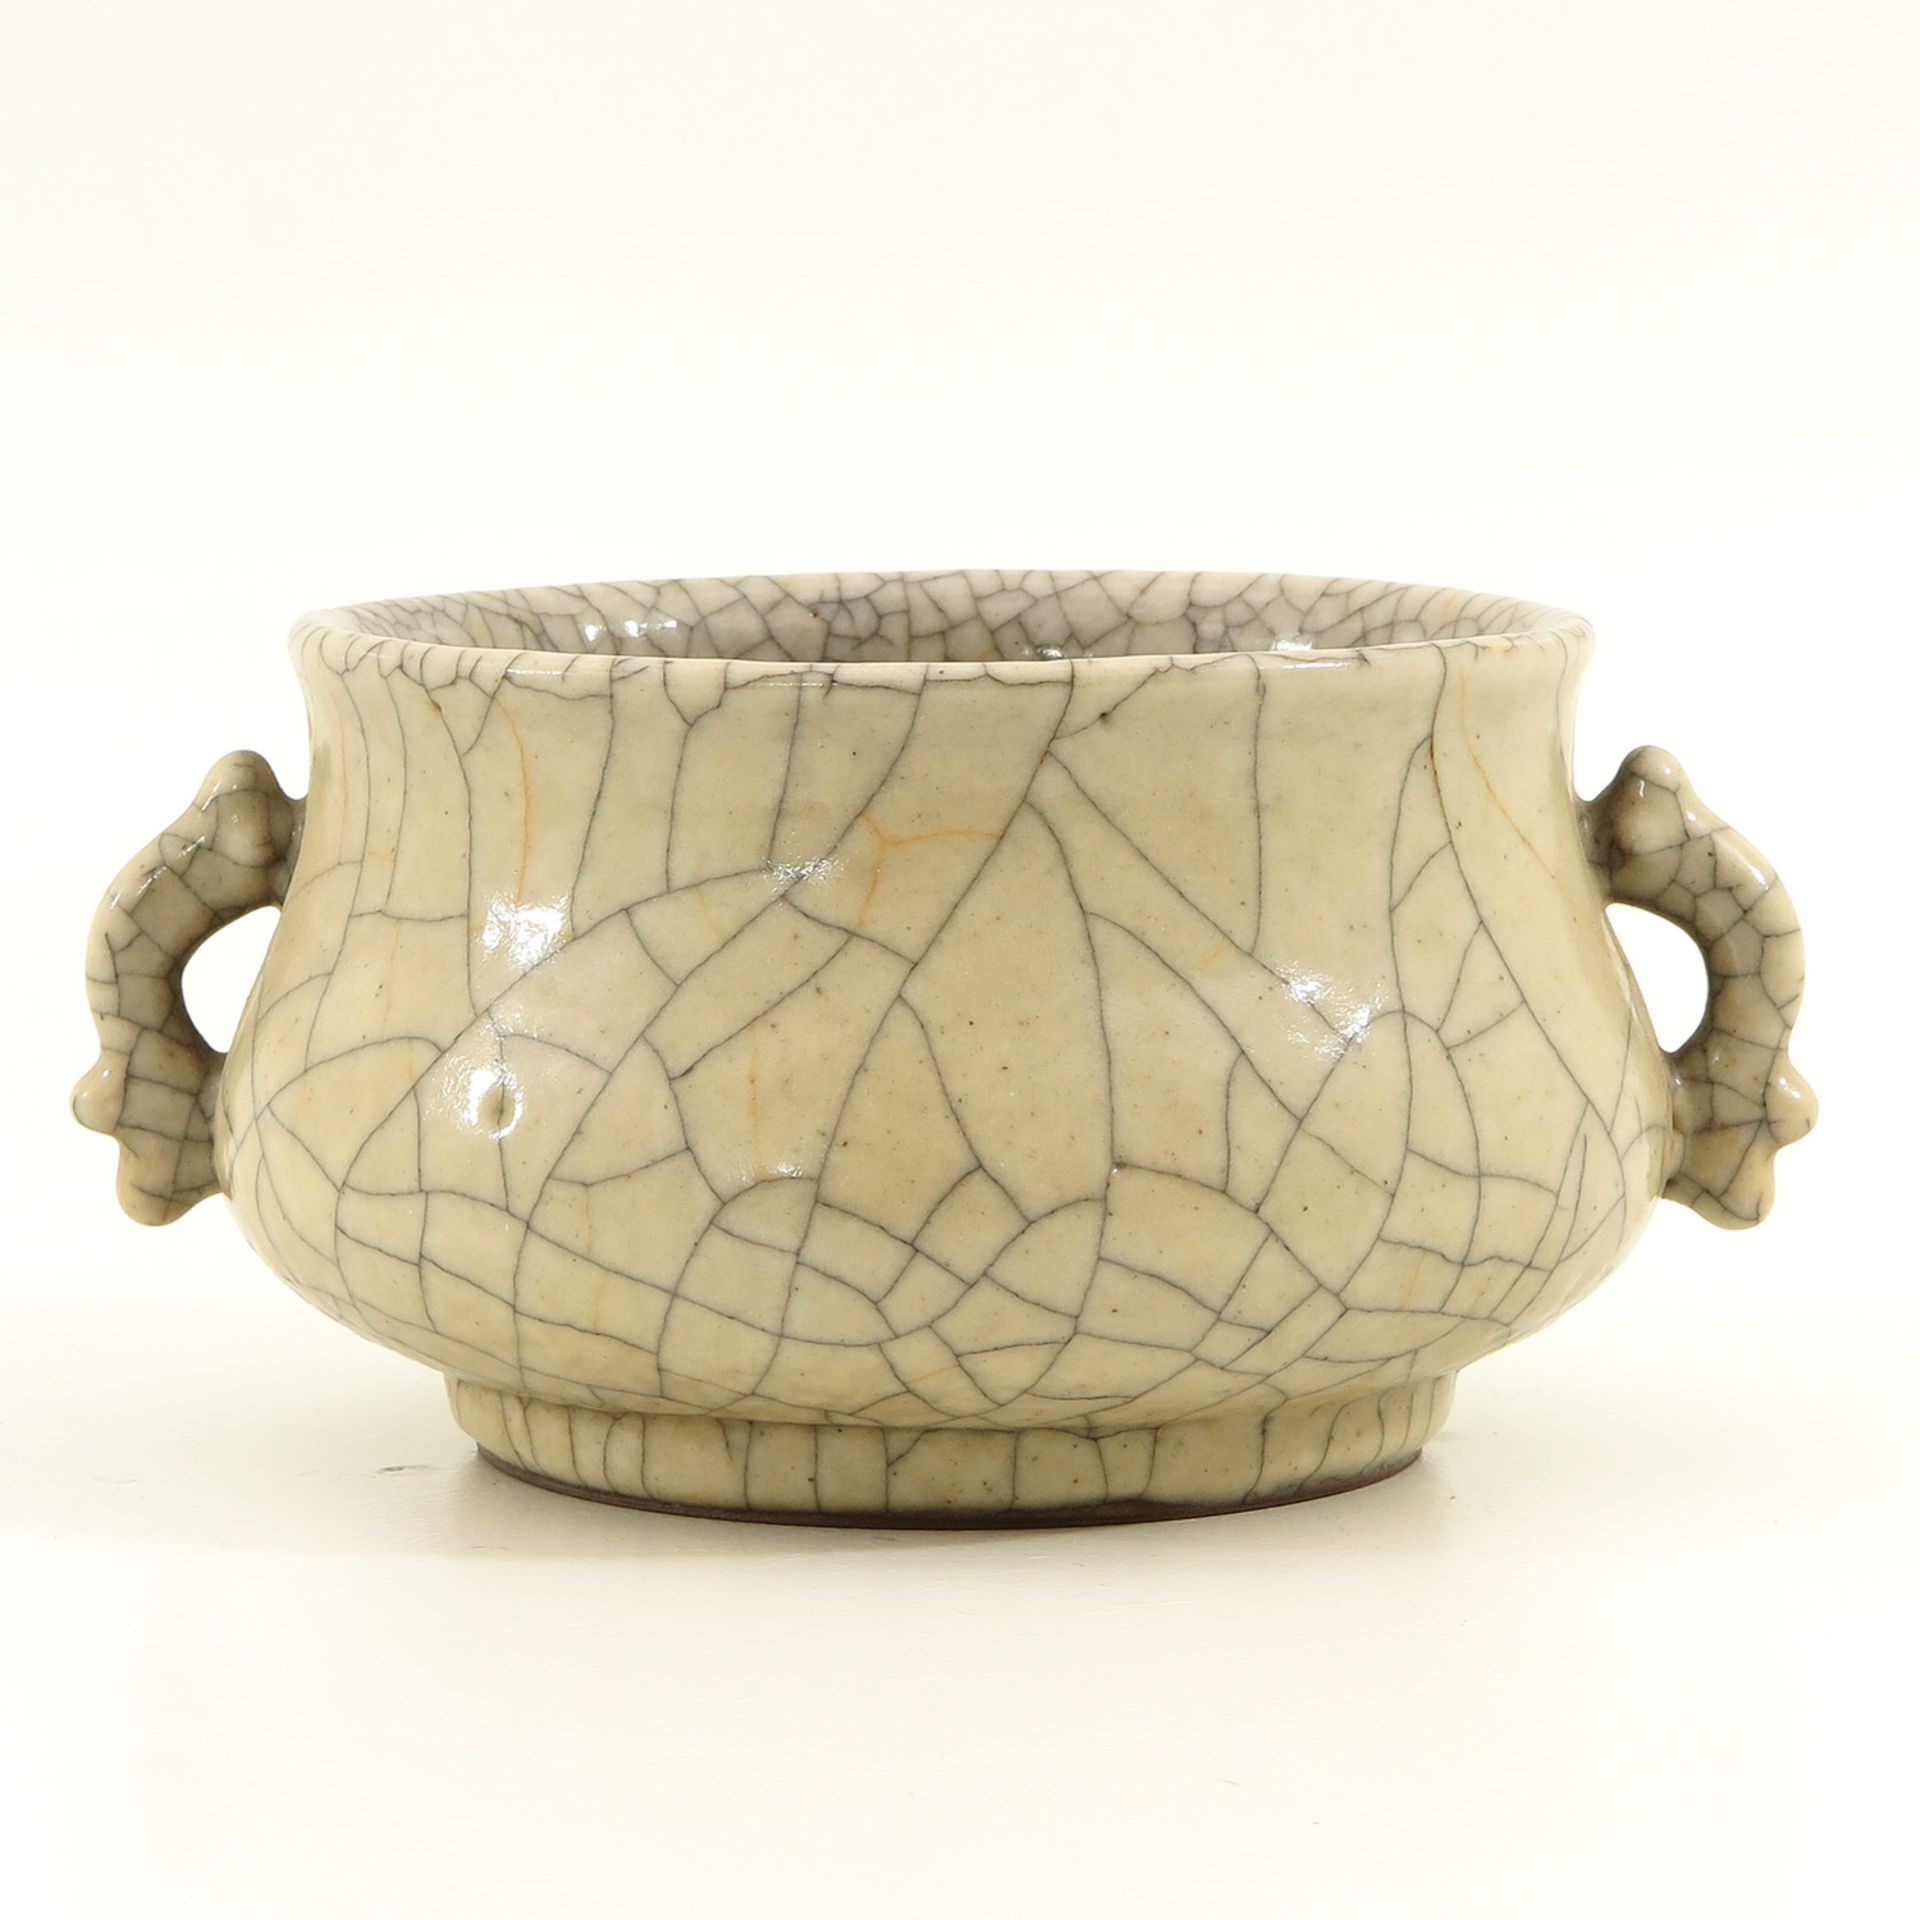 A Chinese Crackleware Censer